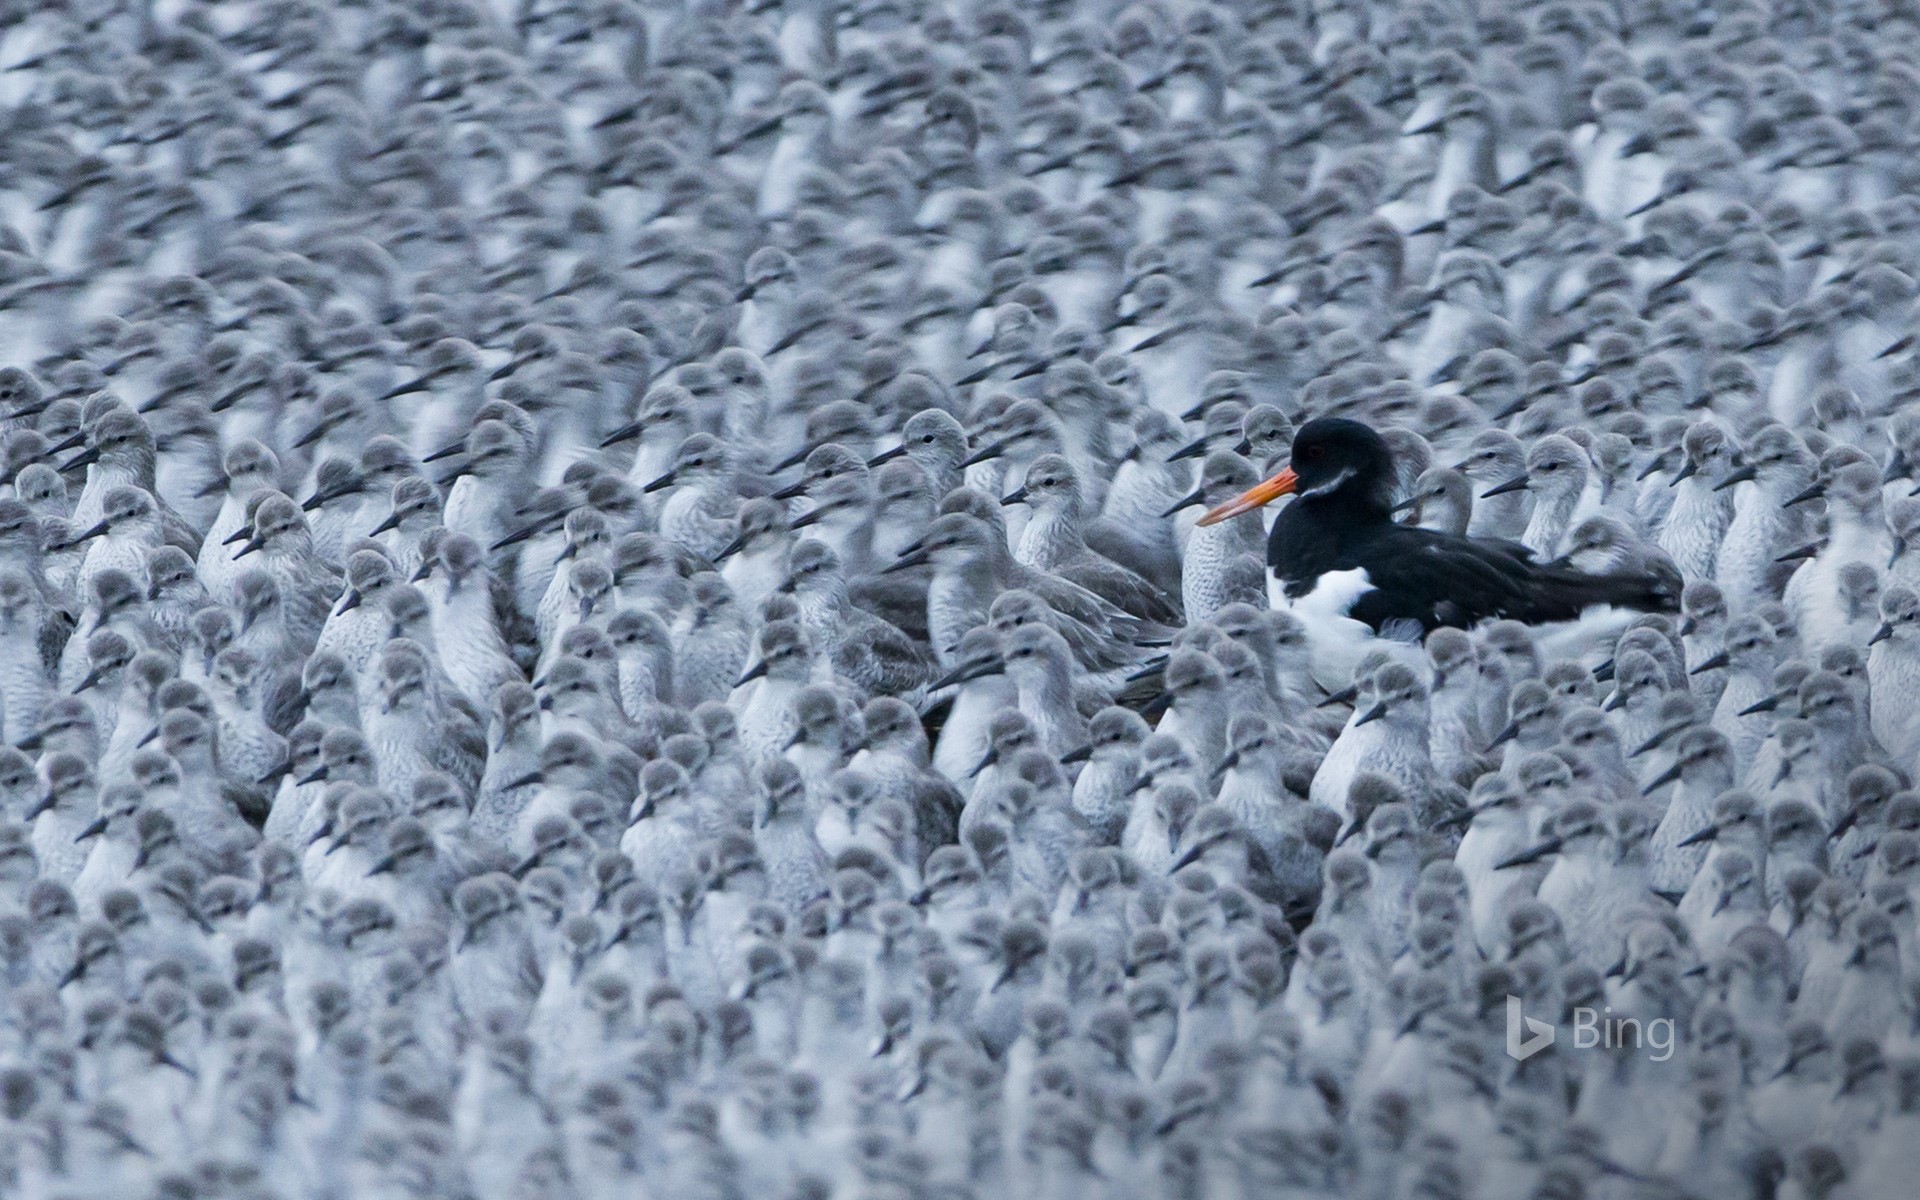 A Eurasian oystercatcher among a flock of roosting knots in Snettisham, Norfolk